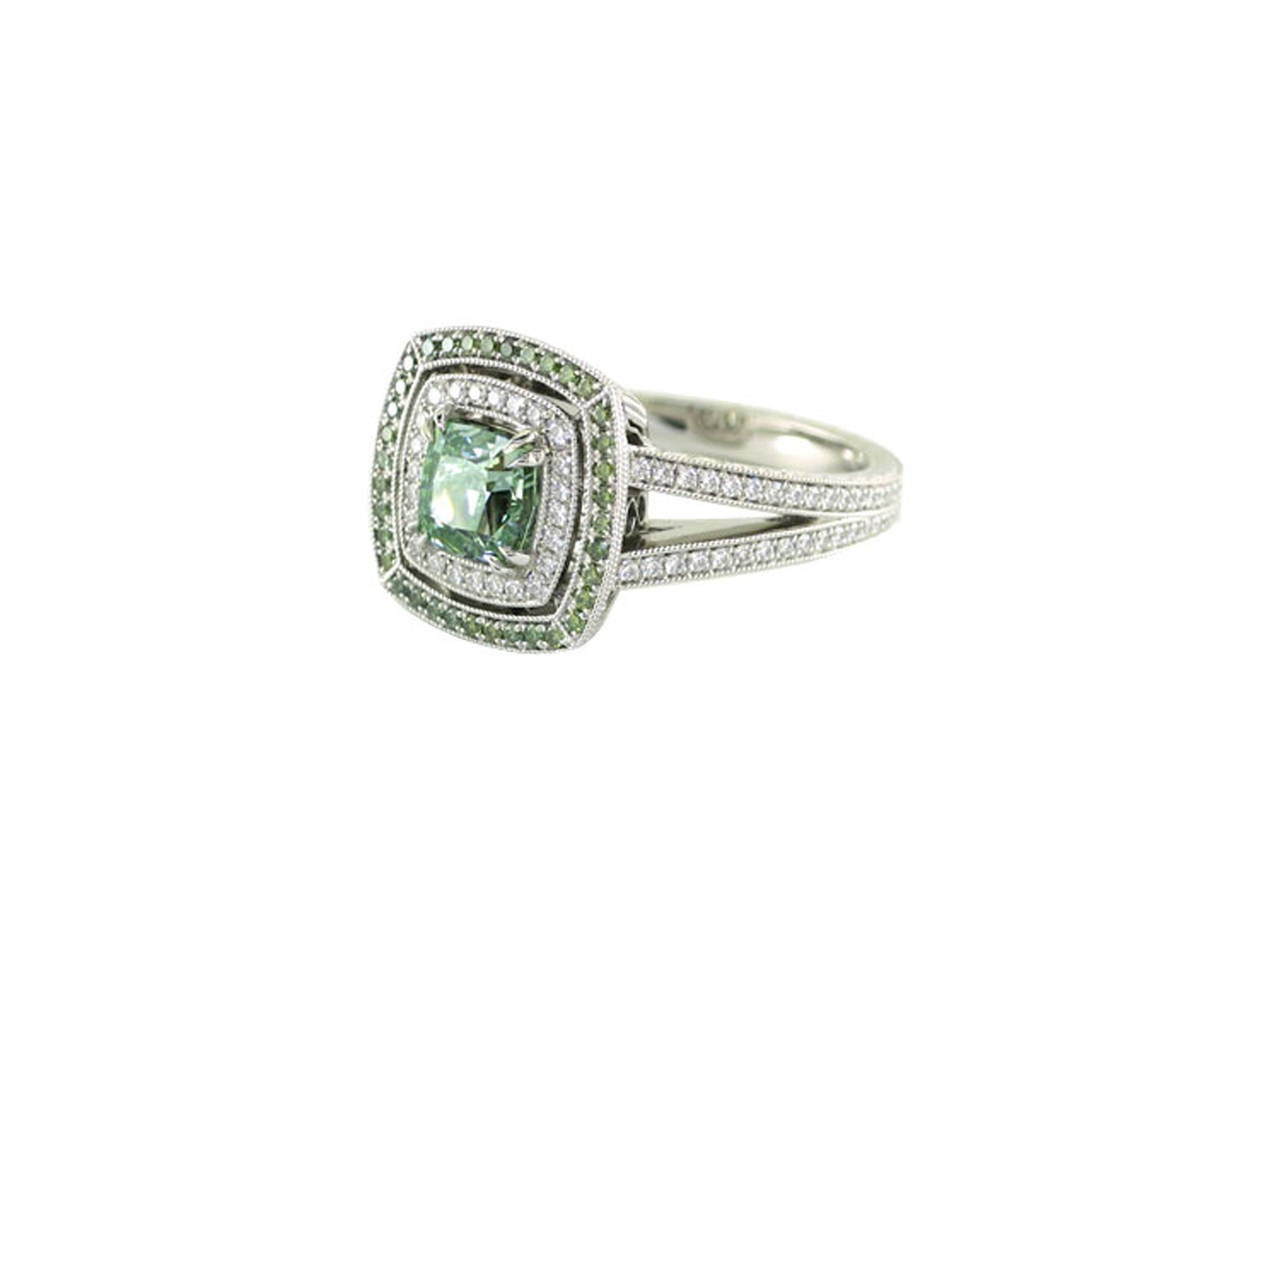 This diamond ring is one of a kind. The center stone is a GIA certified 1.50 ct modified square cut natural fancy intense green VS2 diamond. It is set in a custom made platinum mounting with a grand total of 170 side diamonds (1.27 ct of E color